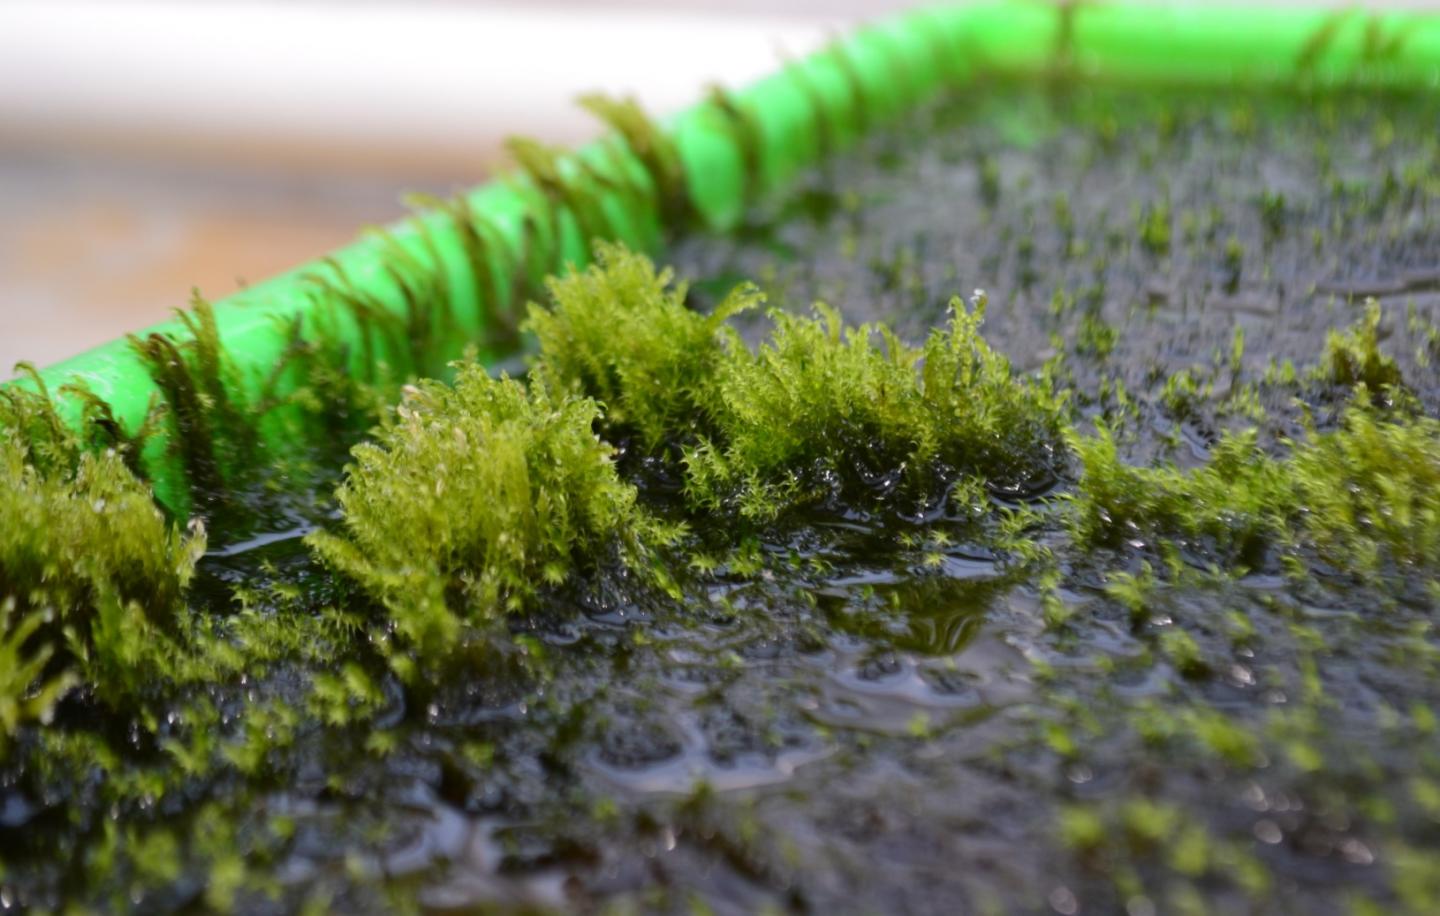 Removing arsenic from contaminated drinking water using moss results in clean useable water